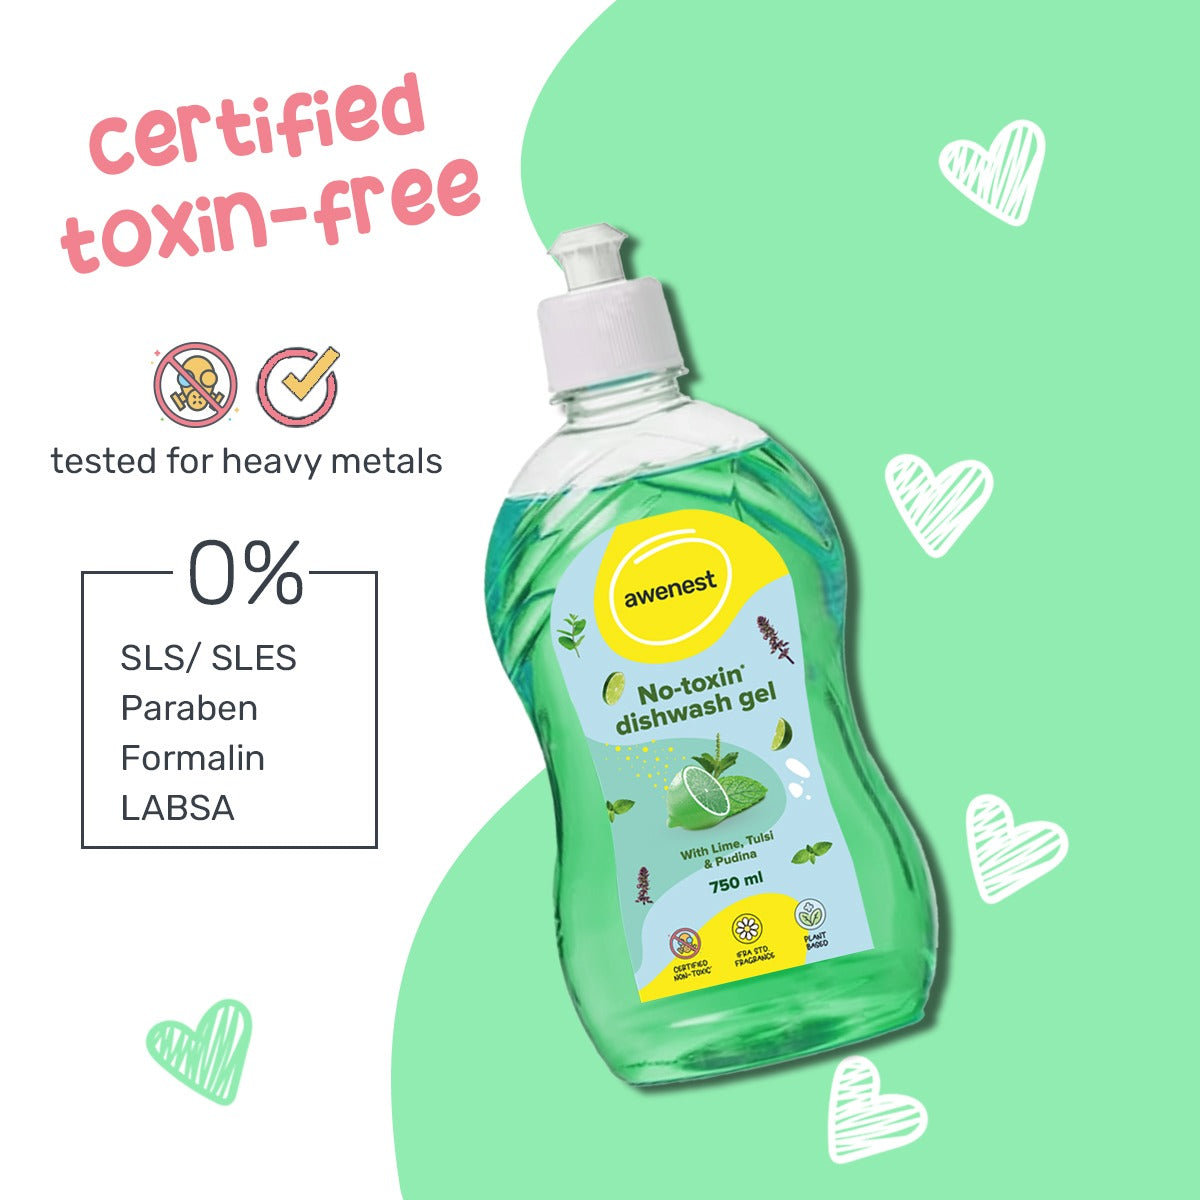 awenest toxin-free, plant-based lime, tulsi and pudina dishwash with no sles, paraben, formalin, labsa